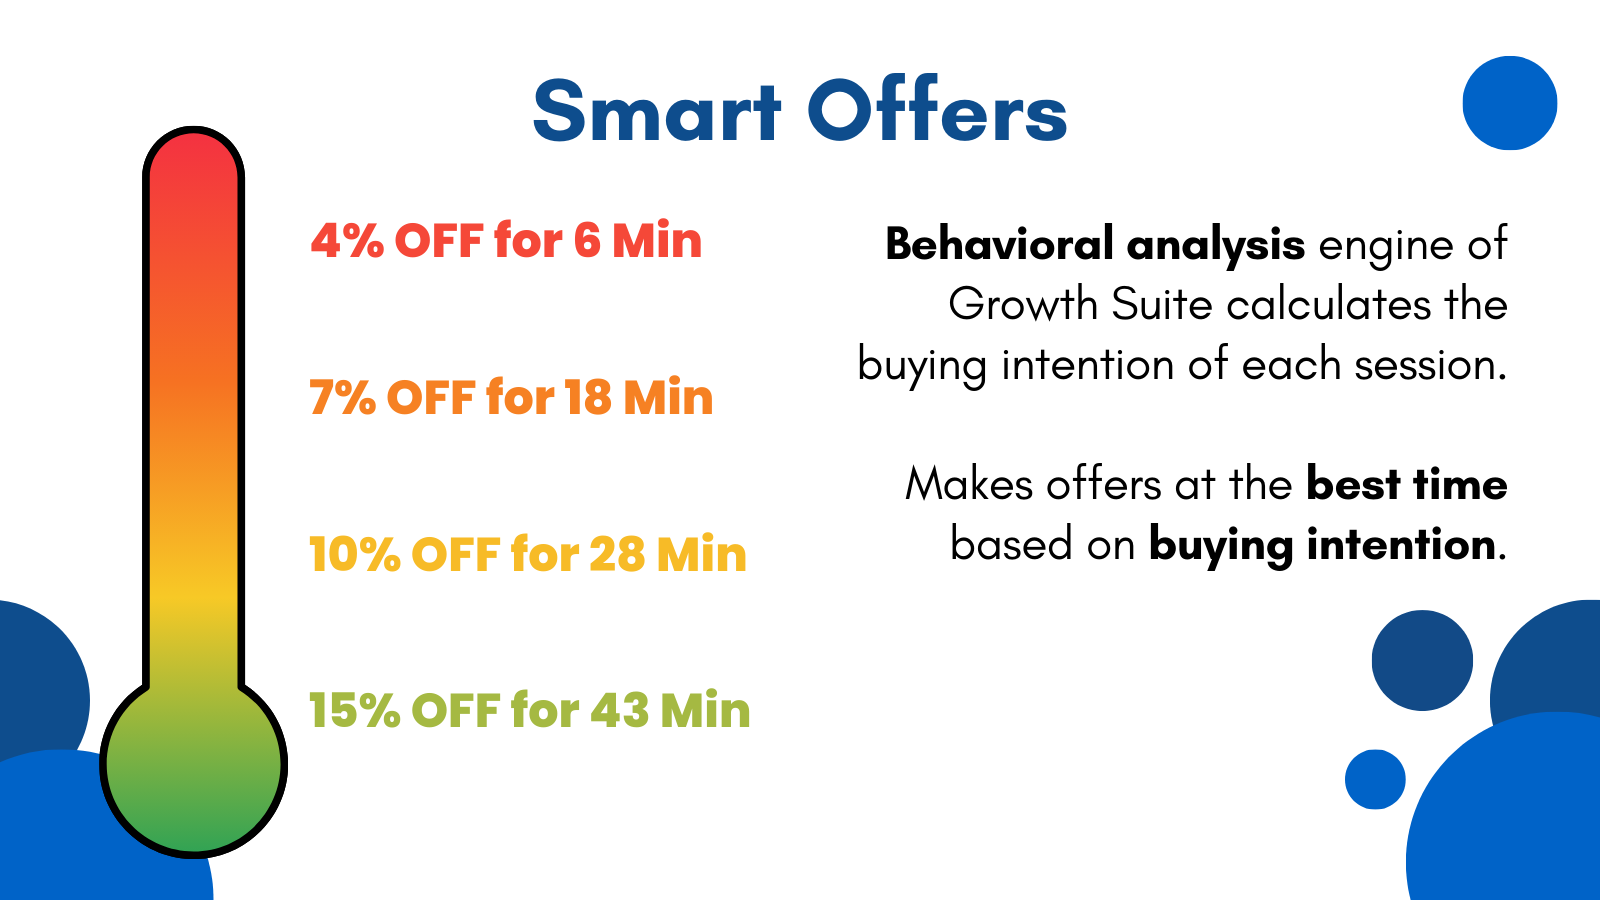 Smart Offers Based on Buying Intention